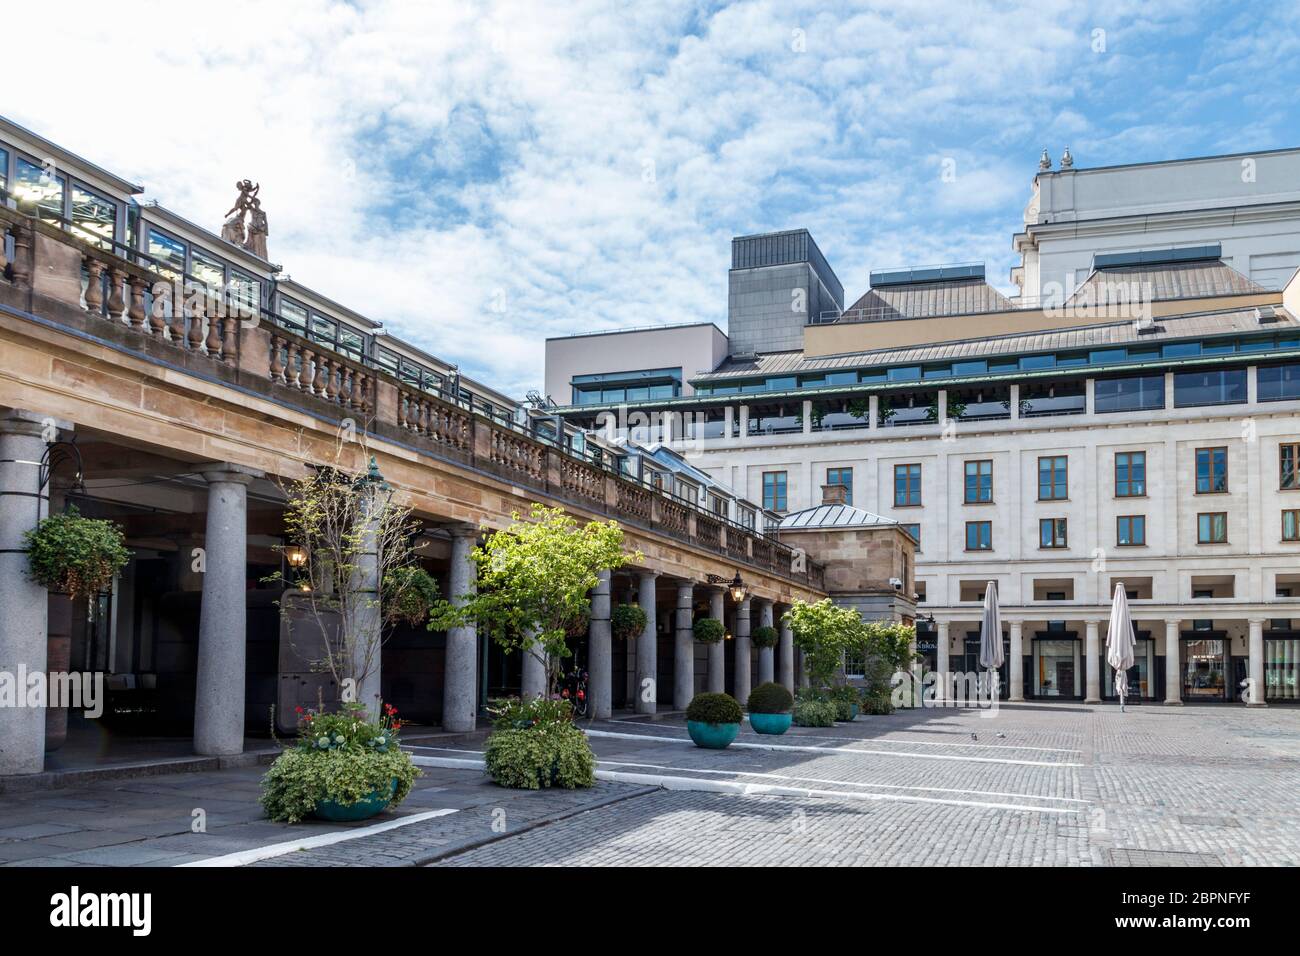 Covent Garden Market, normally busy, almost deserted on a weekend during the coronavirus pandemic lockdown, London, UK Stock Photo